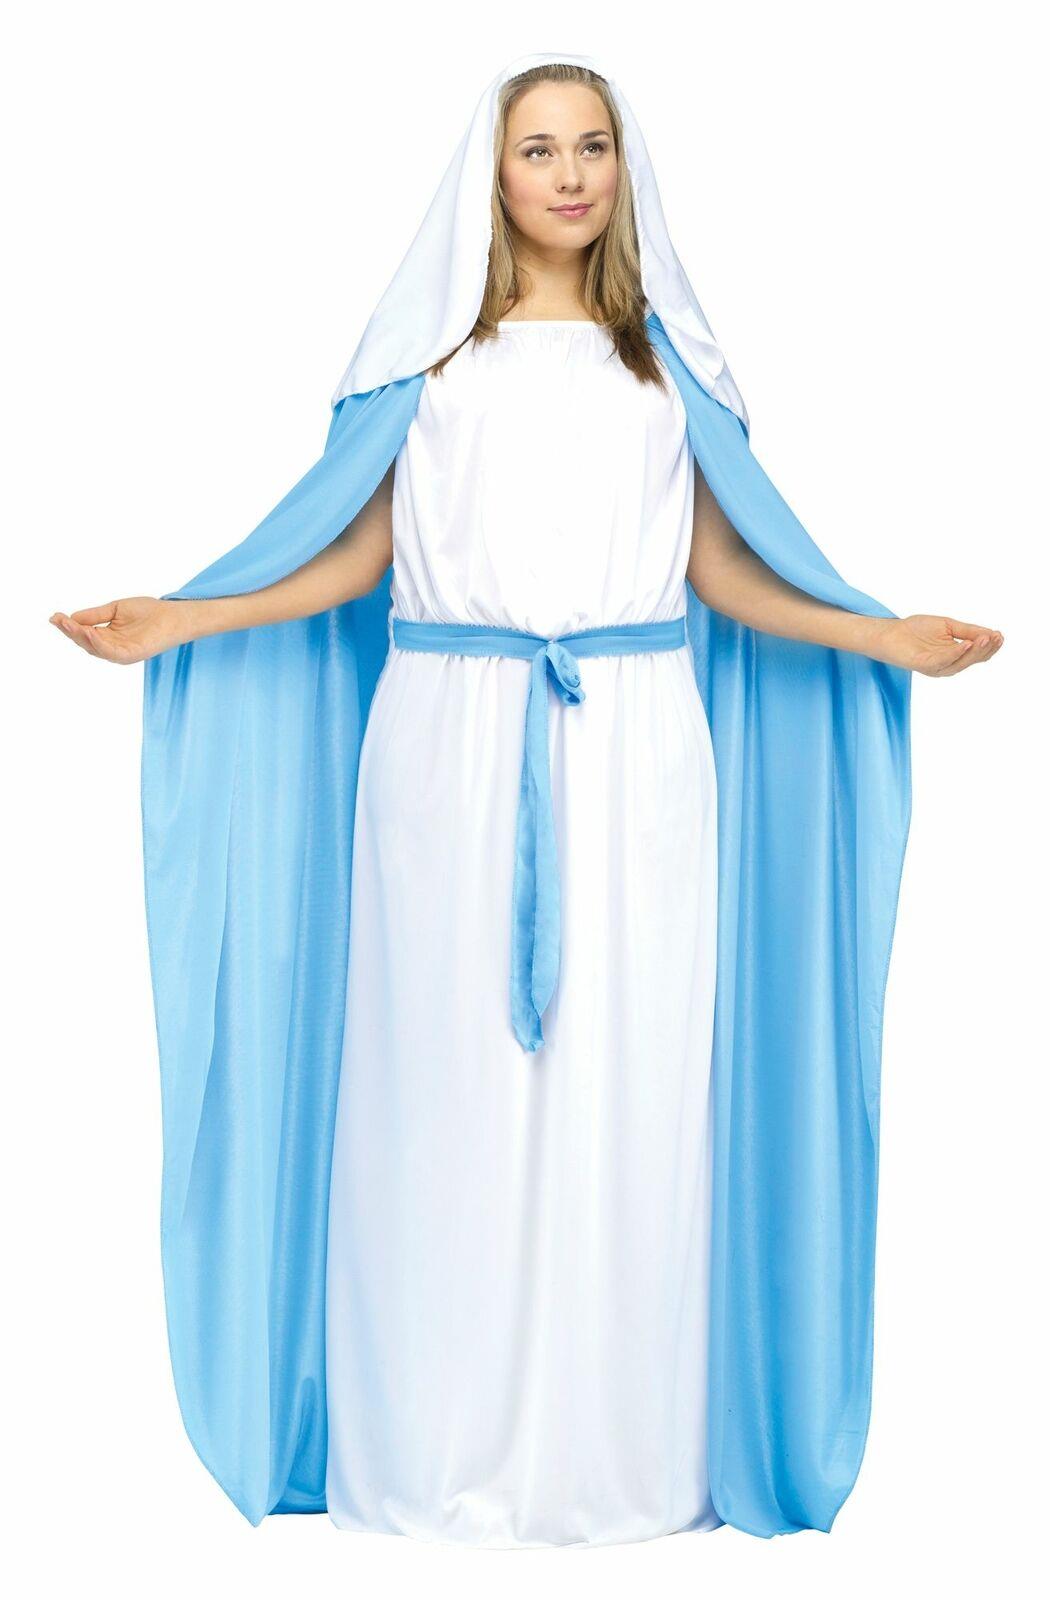 Women's Mother Mary Costume - One Size